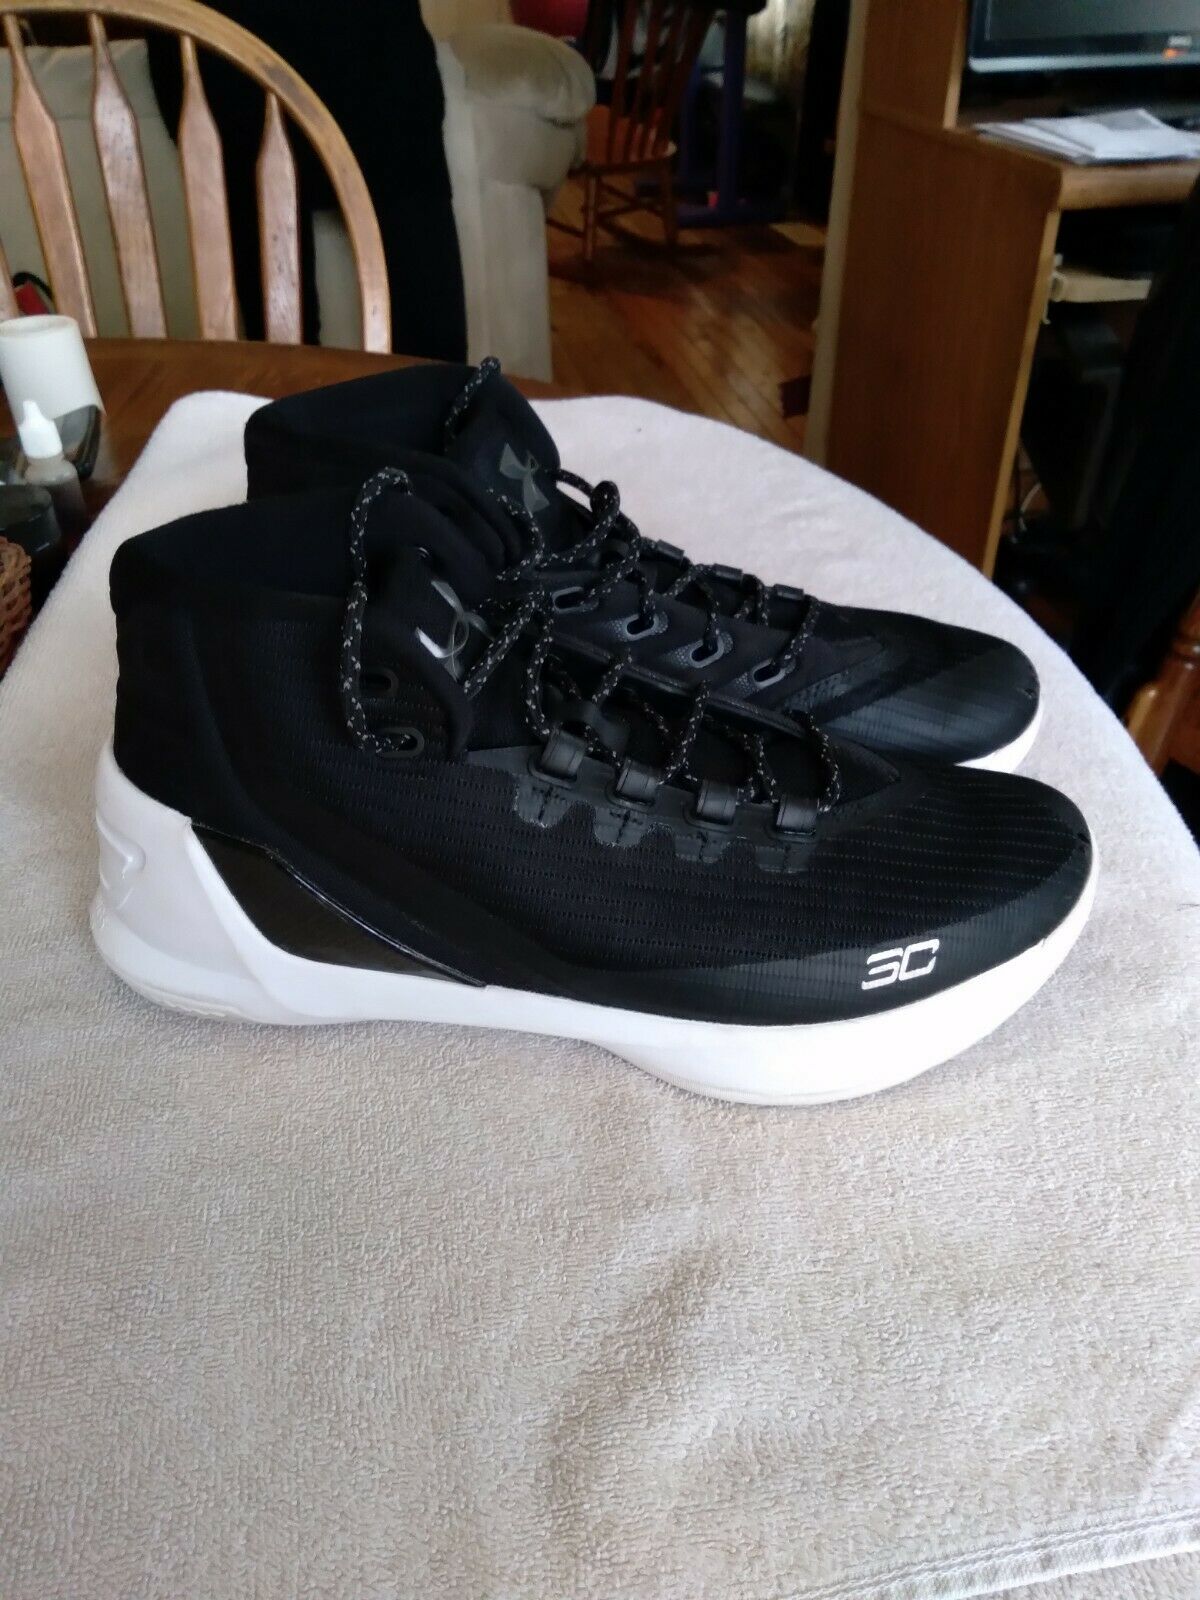 Under Armour Curry 3 Mens Size 9, Black/white Basketball Shoes